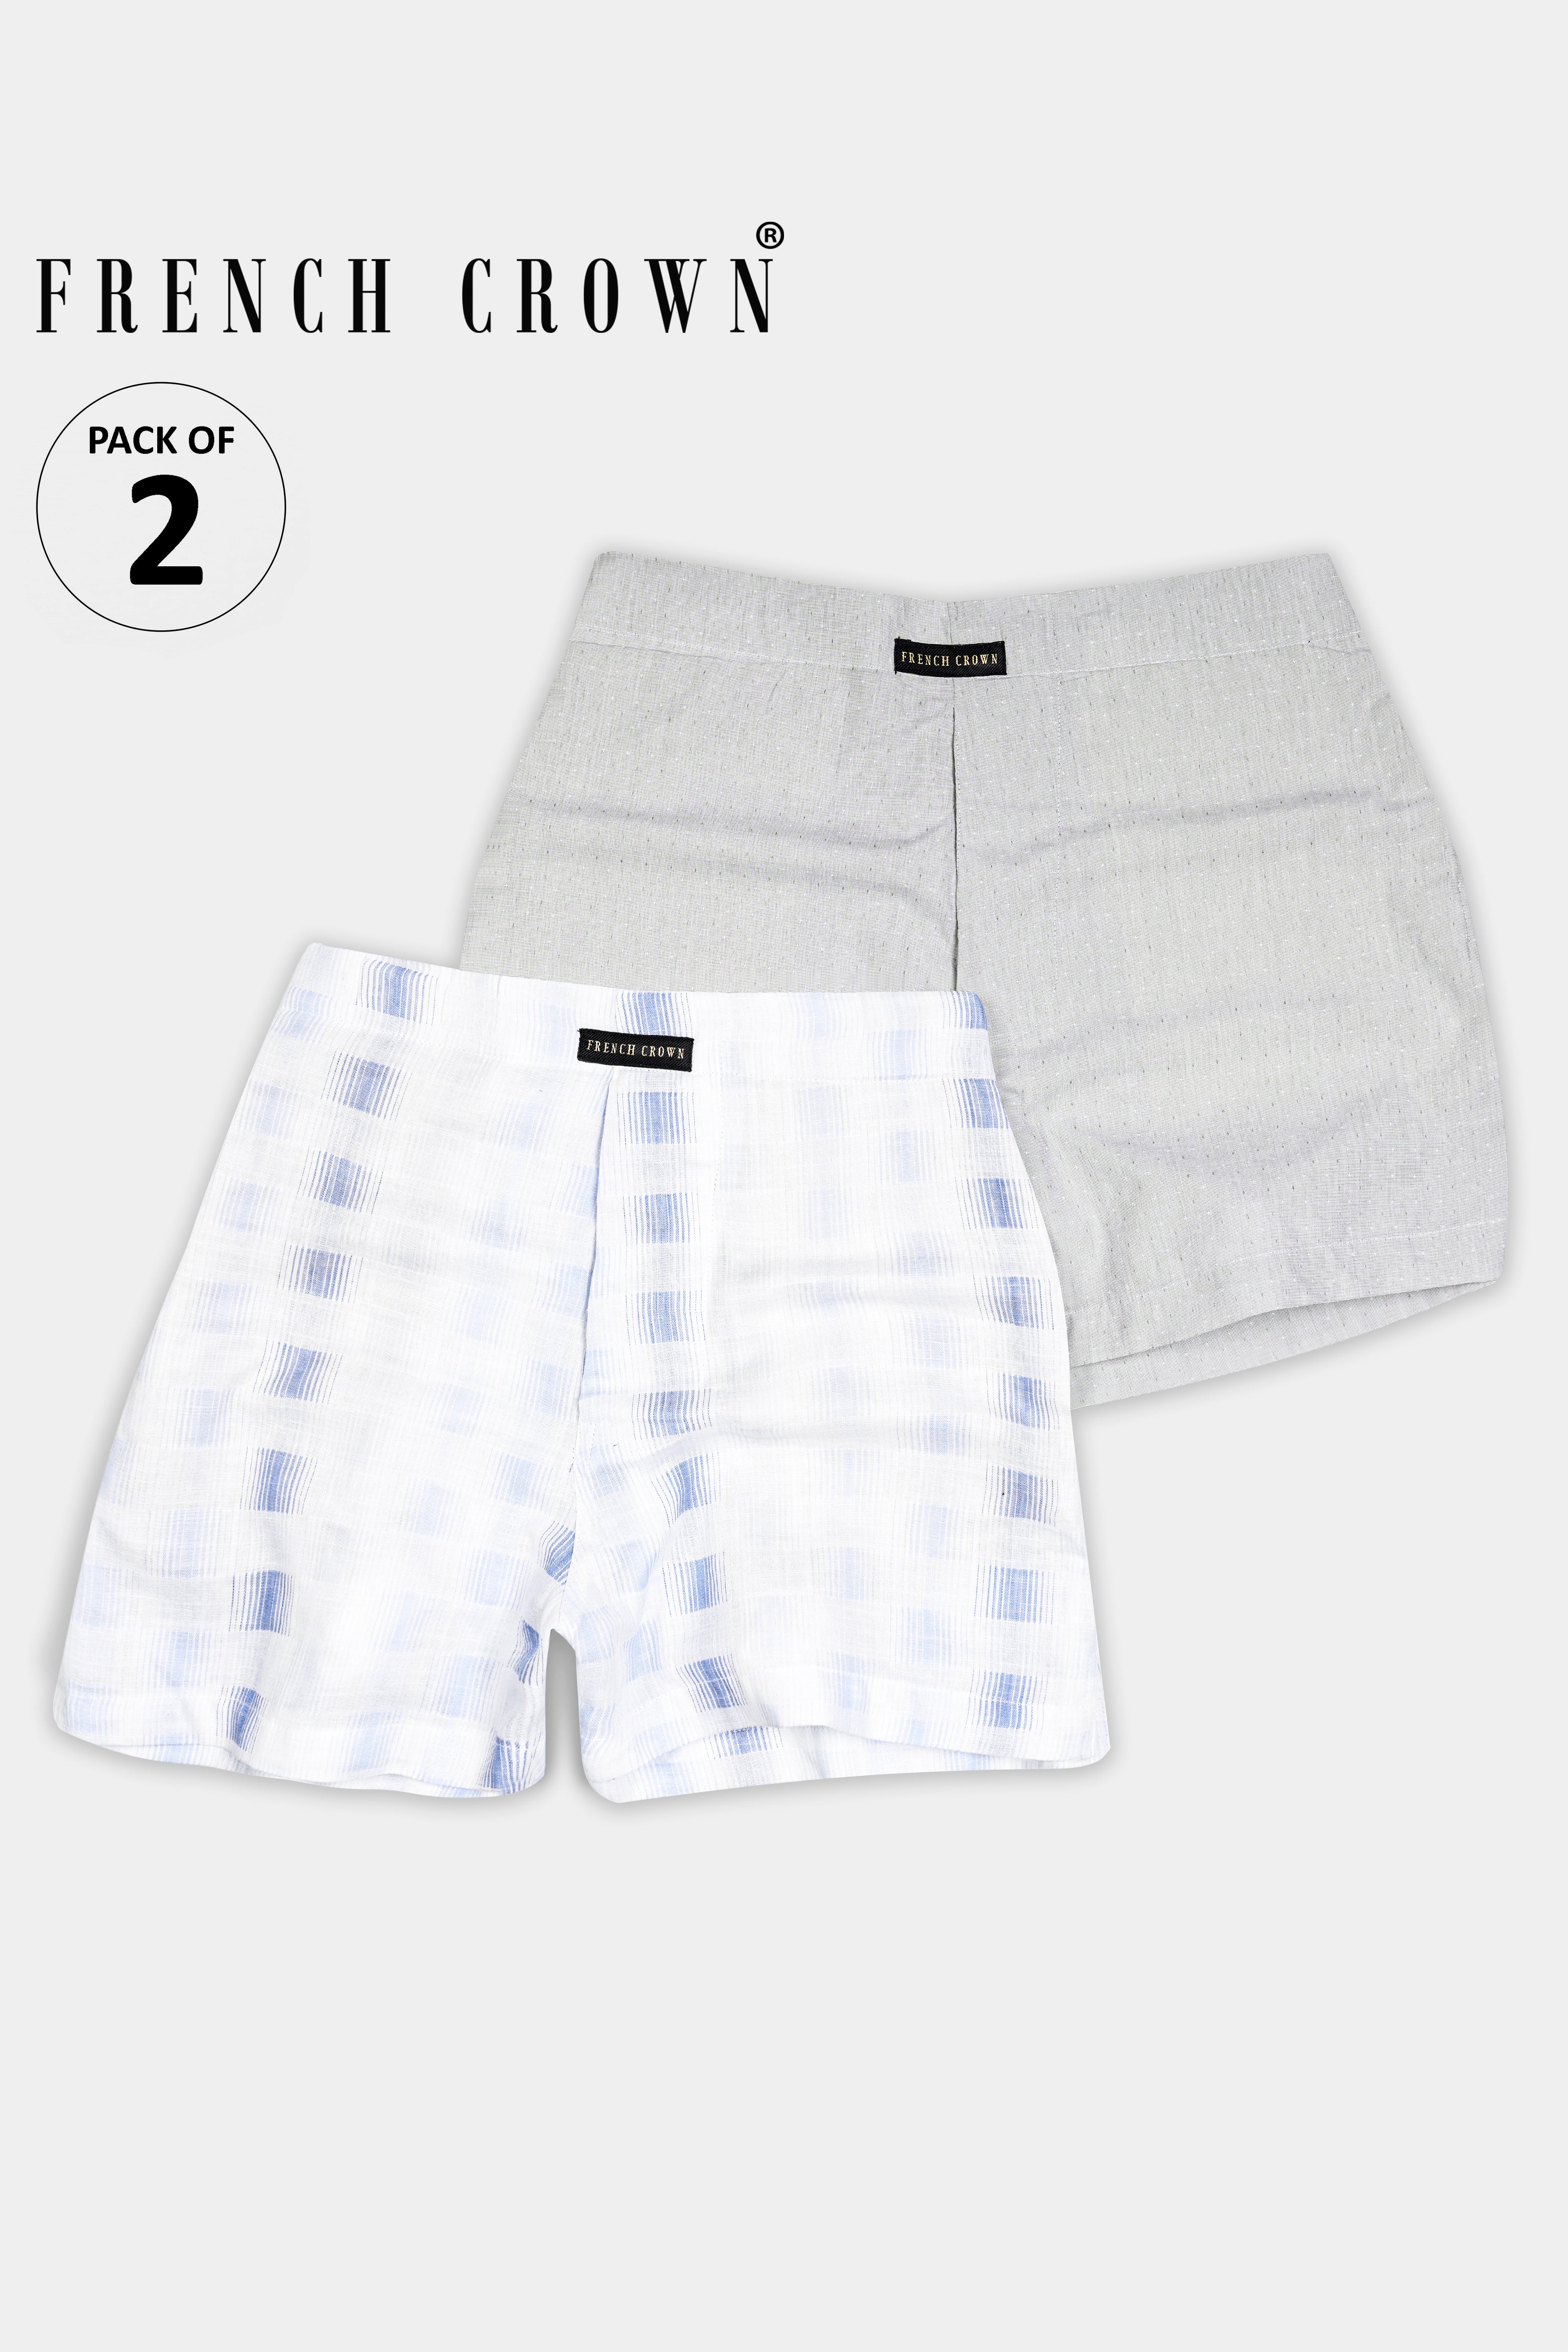 Ghost Gray and Bright White with Tealish Blue Dobby Textured Premium Giza Cotton Boxers BX561-BX549-28, BX561-BX549-30, BX561-BX549-32, BX561-BX549-34, BX561-BX549-36, BX561-BX549-38, BX561-BX549-40, BX561-BX549-42, BX561-BX549-44